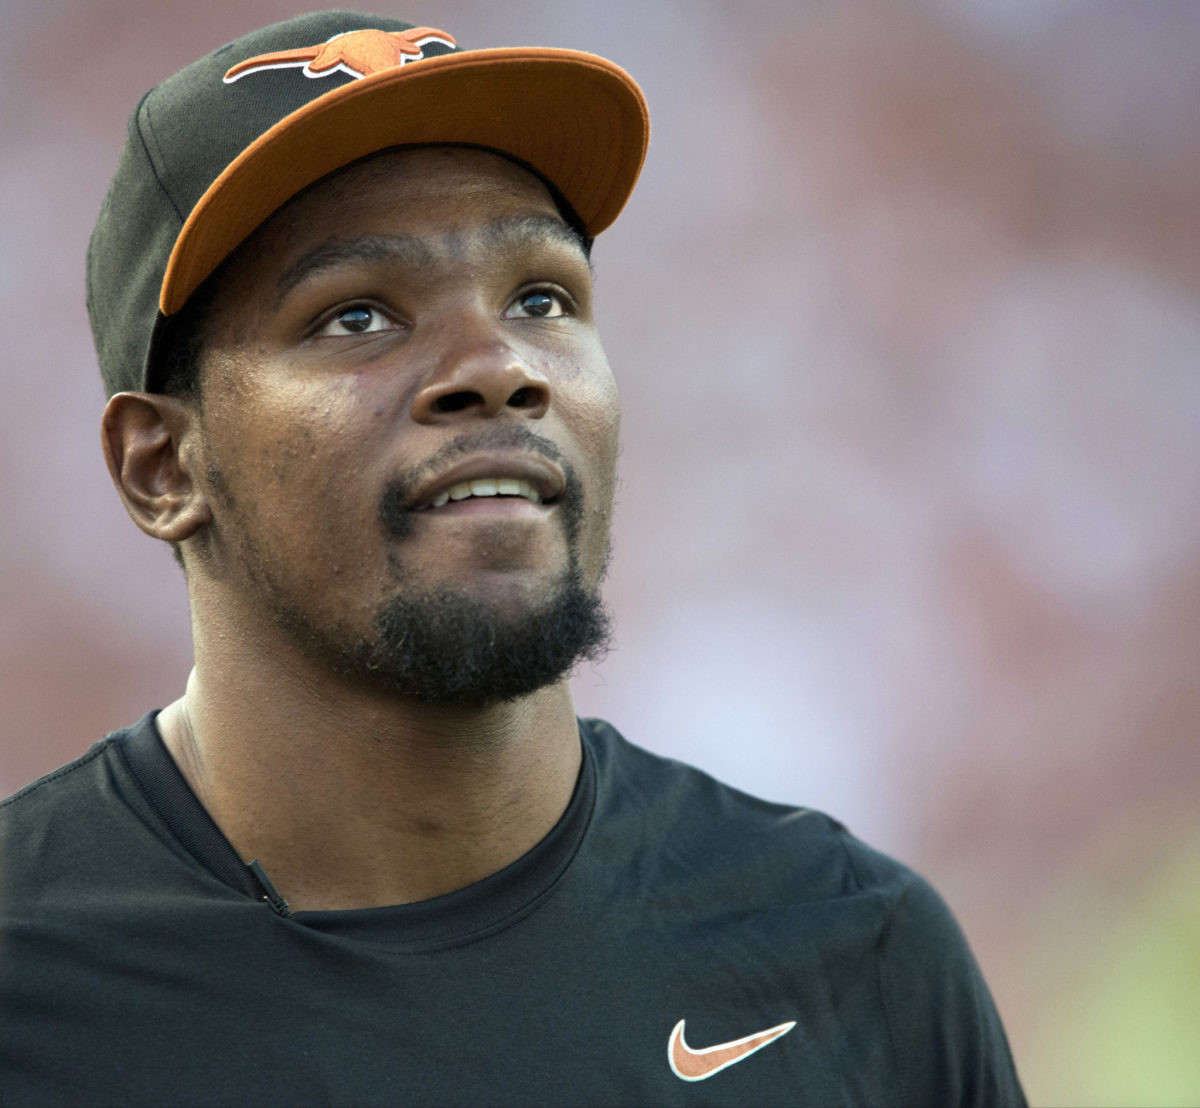 Kevin Durant wearing a Texas Longhorns hat at a Texas game.